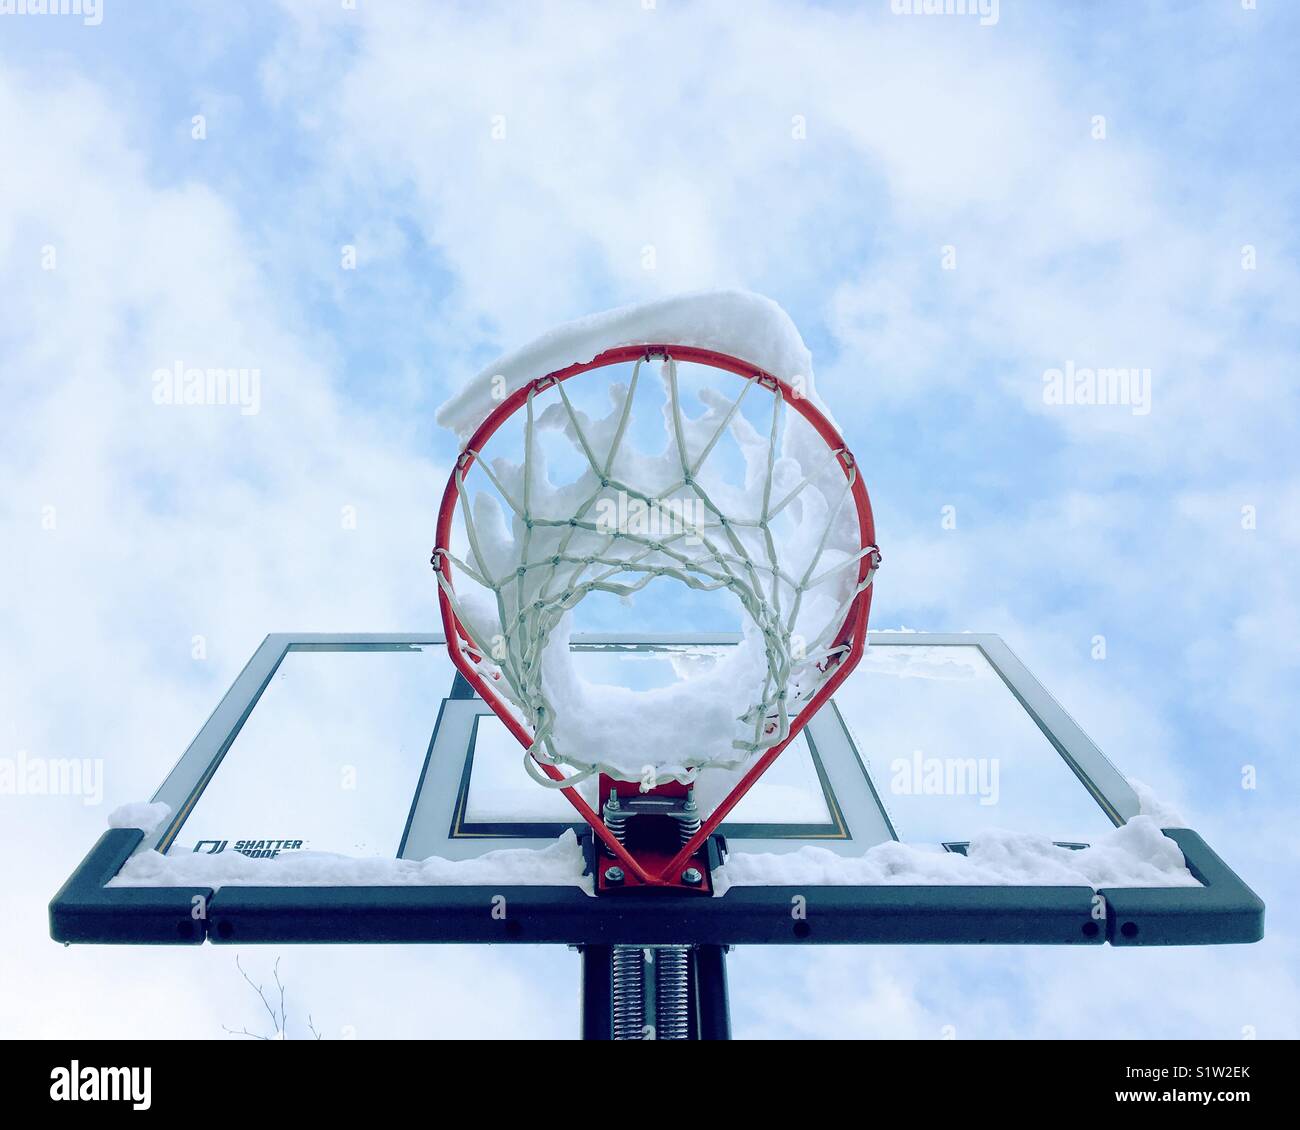 Looking up at a snow covered basketball hoop with little white clouds and blue sky above. Stock Photo